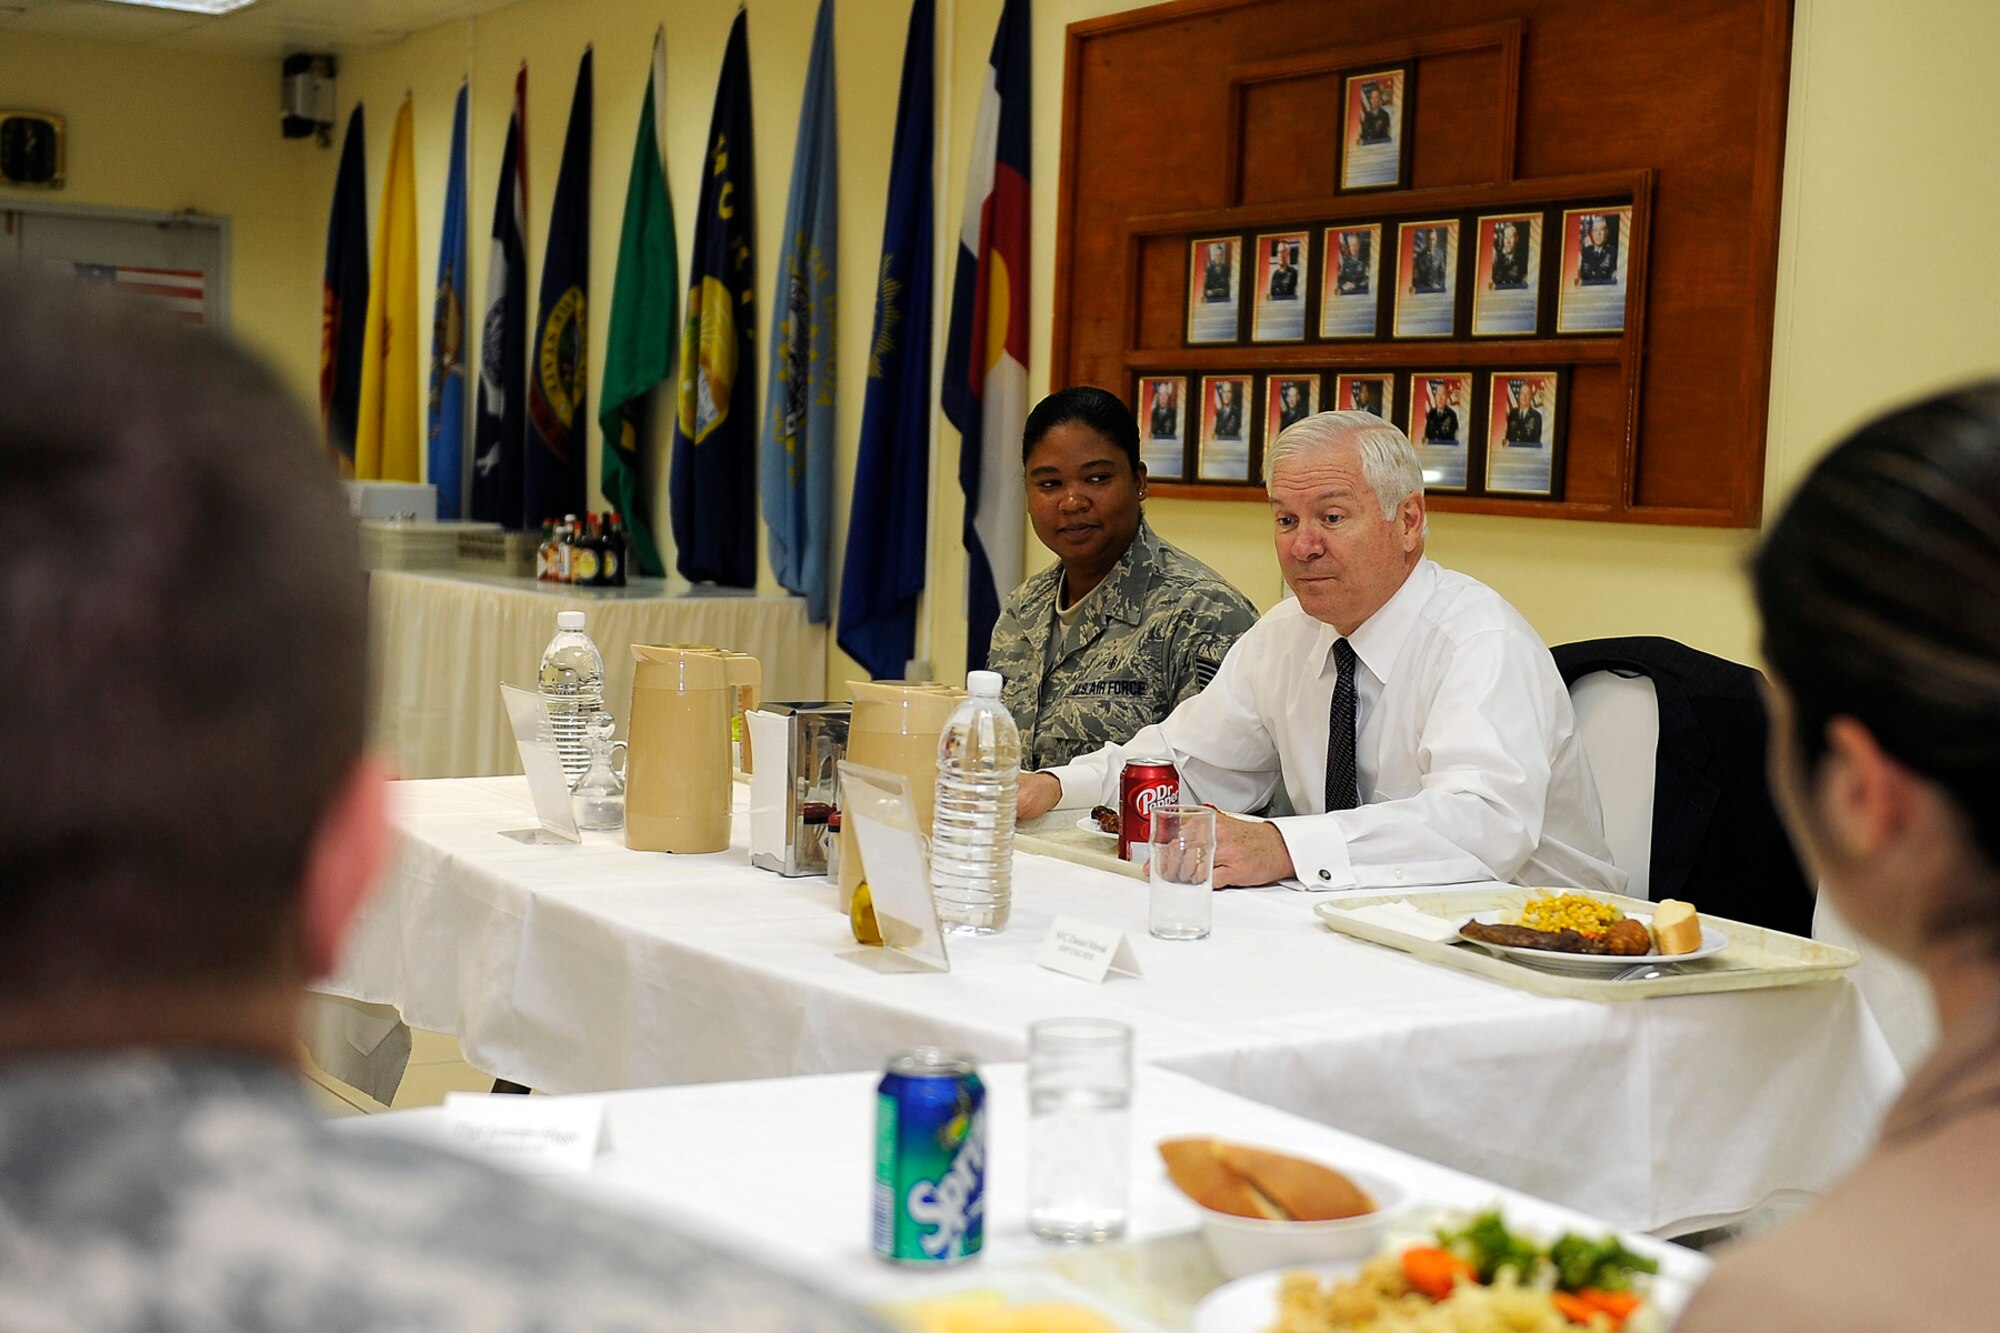 Secretary of Defense Robert Gates has lunch with servicemembers at Joint Base Balad, Iraq, Dec. 13. Gates was in Iraq wrapping up a four-day tour of the Middle East meeting with regional commanders and troops. (U.S. Air Force photo/Tech. Sgt. Jerry Morrison)